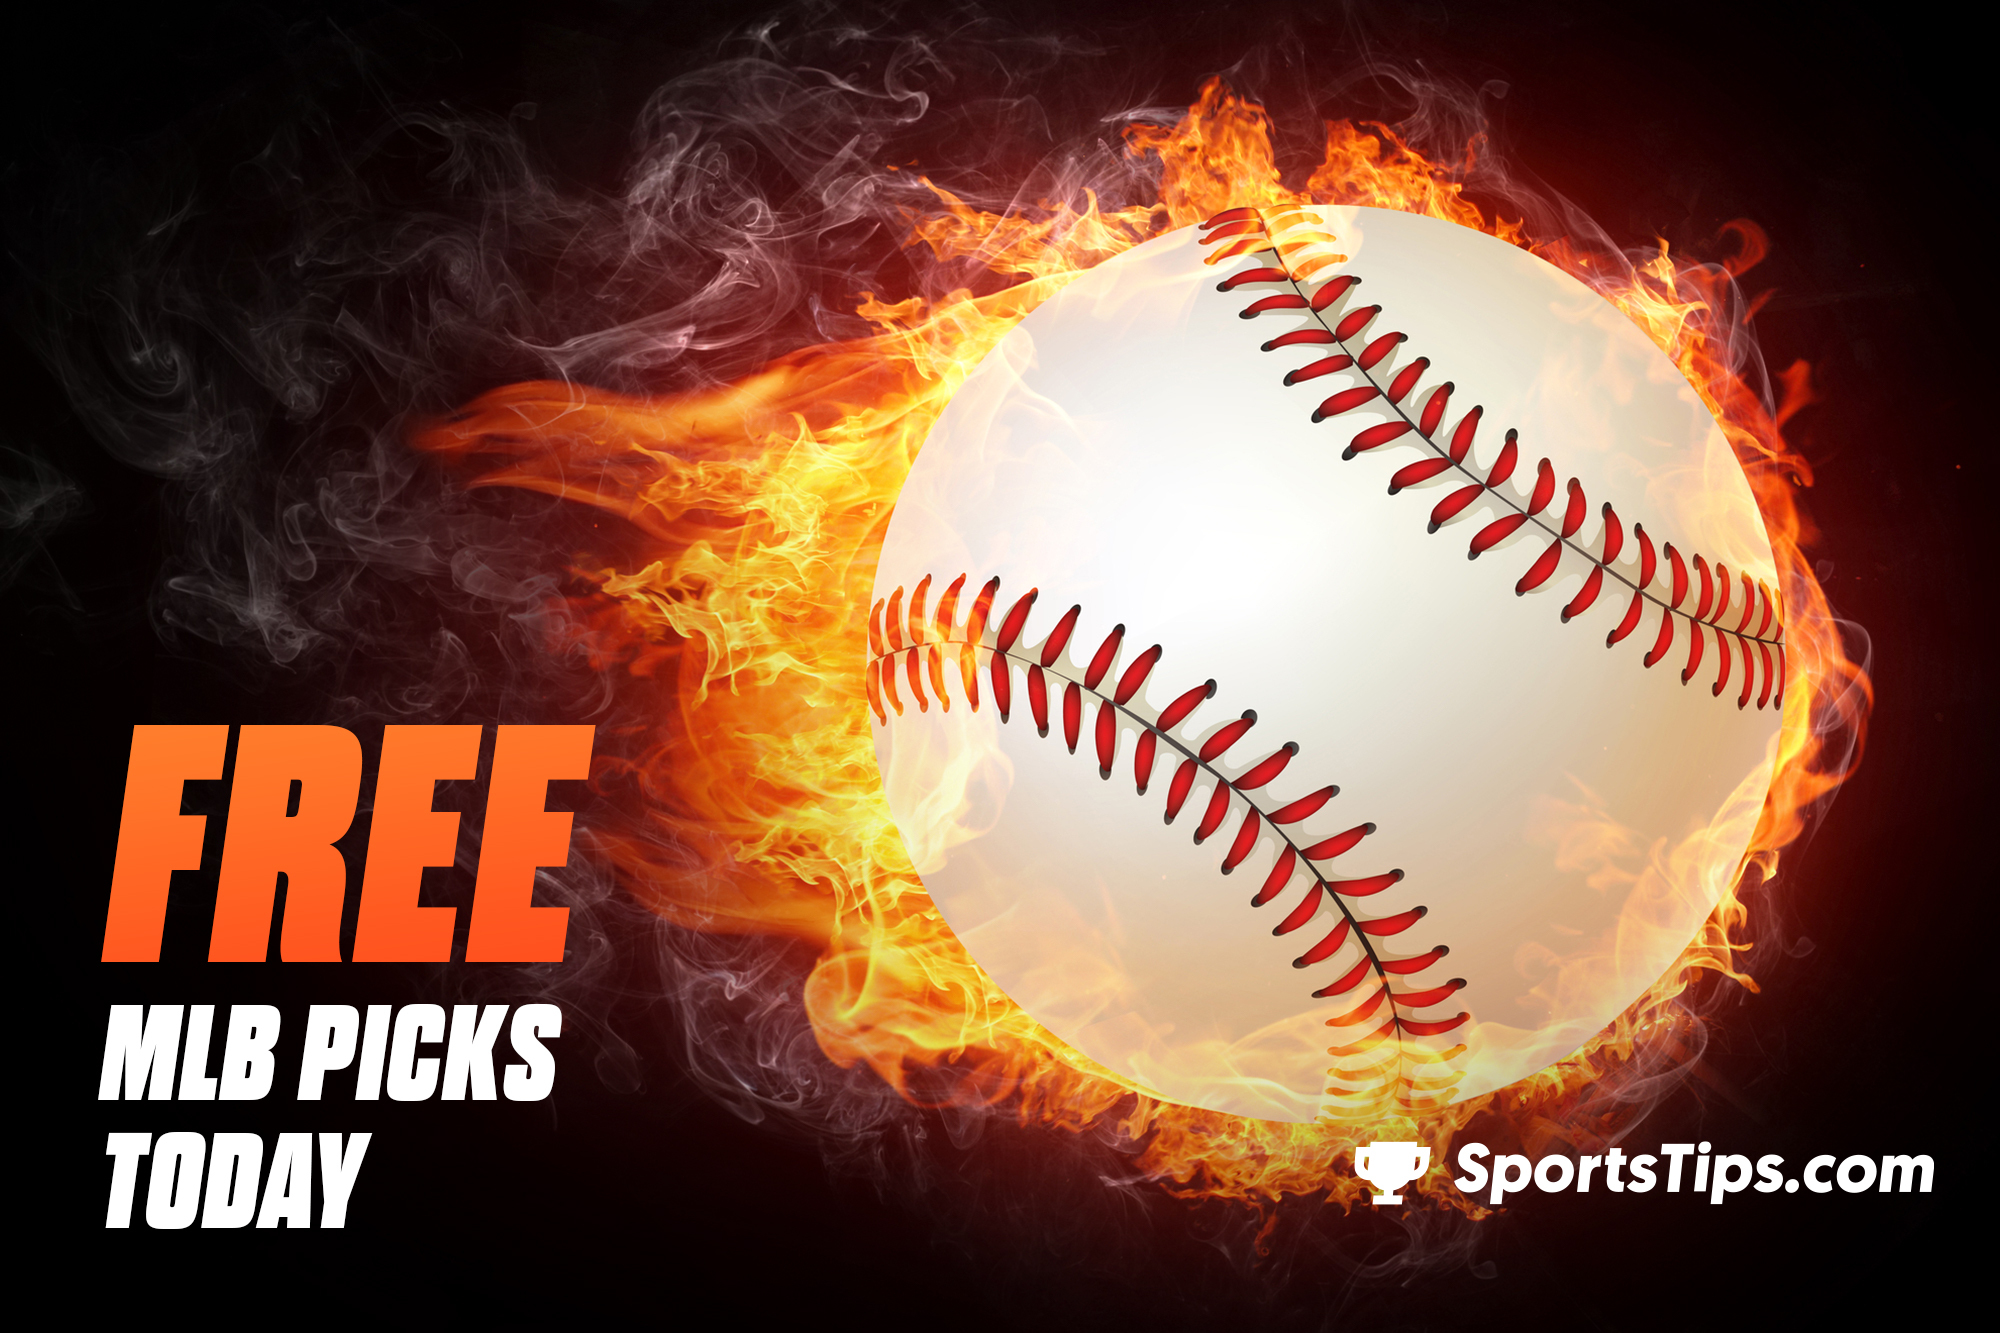 Free MLB Picks Today for Sunday, June 13th, 2021